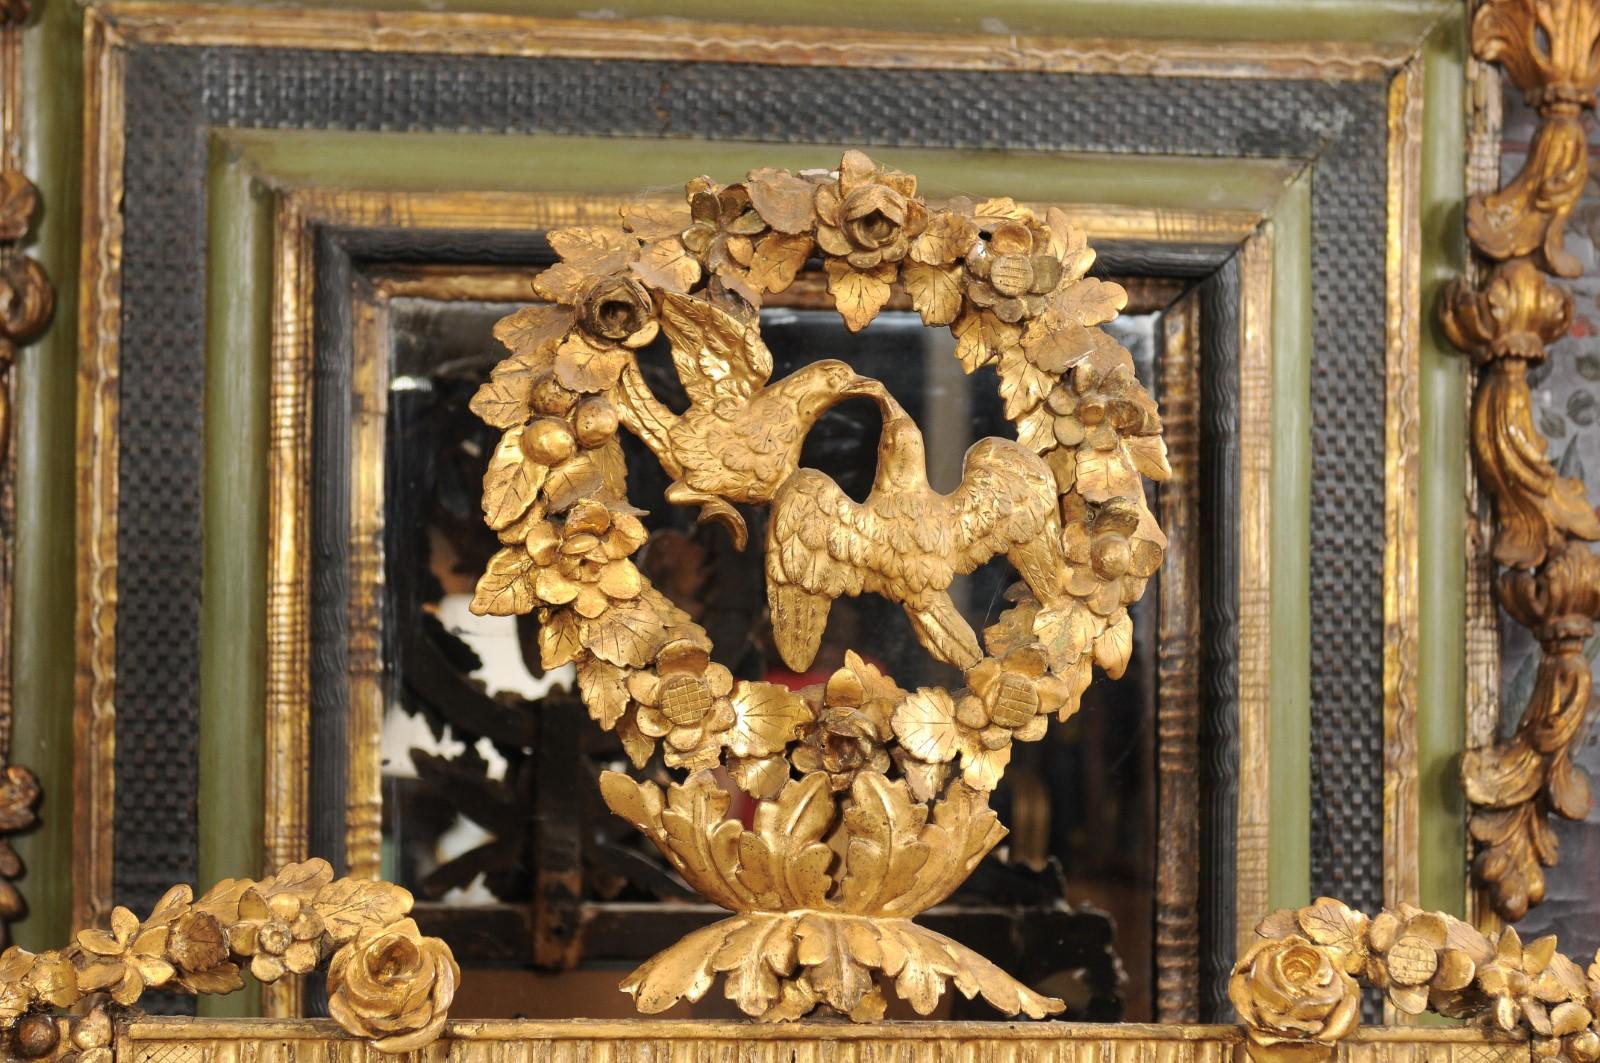 Giltwood Mirror with Rose Garland & Kissing Doves Crest, 19th Century Italy For Sale 5